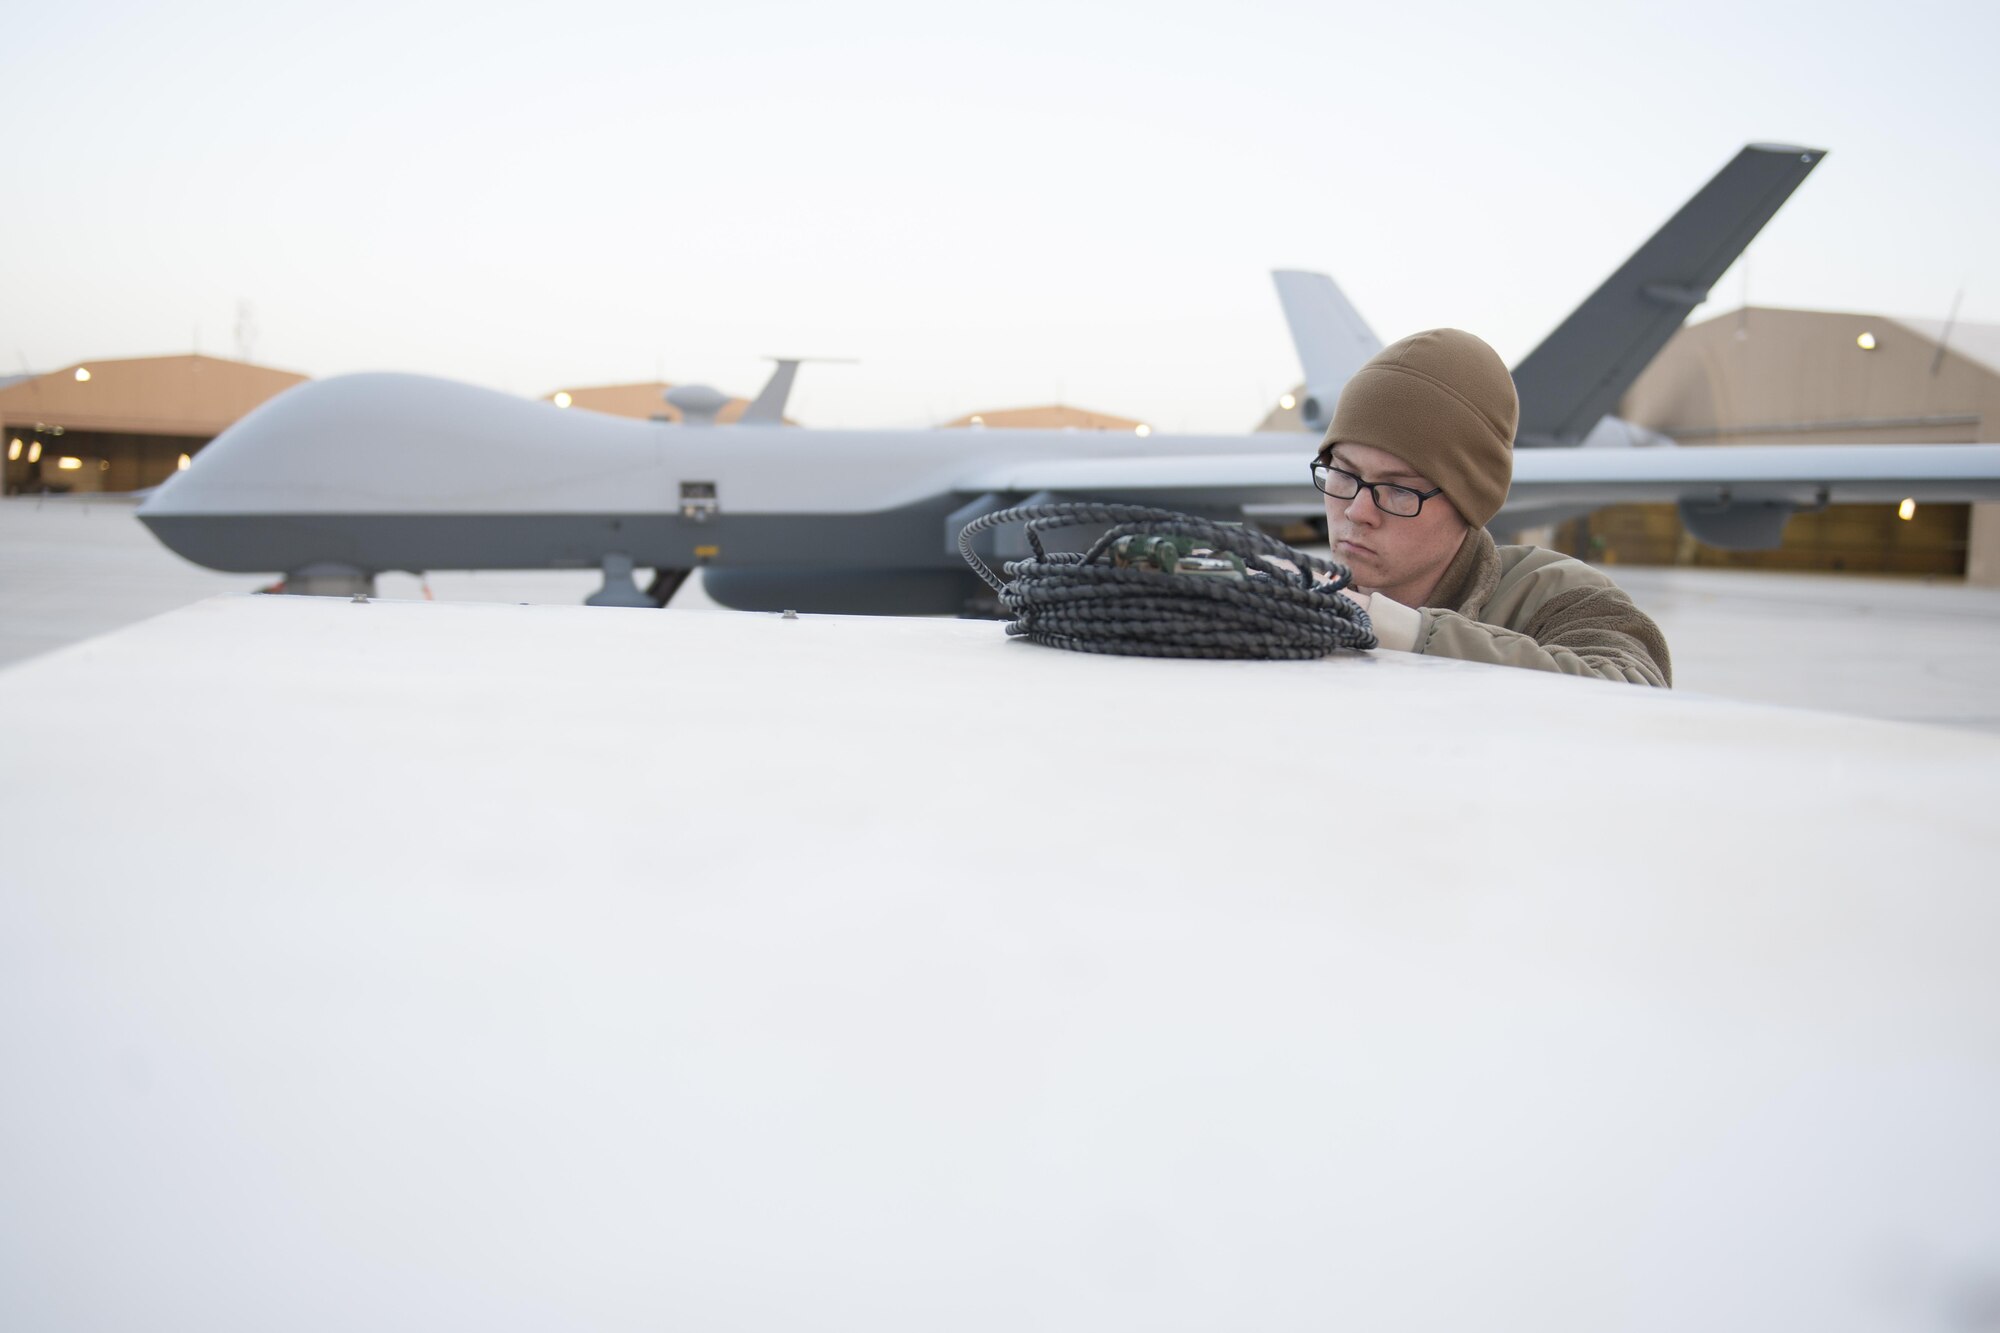 Airman 1st Class Devin, 62nd Expeditionary Reconnaissance Squadron aircraft specialist, puts away a power cable after preflight checks on an MQ-9 Reaper at Kandahar Airfield, Afghanistan, Dec. 6, 2015. The Reaper is an armed, multi-mission, medium-altitude, long-endurance remotely piloted aircraft that is employed primarily as an intelligence-collection asset and secondarily against dynamic execution targets. (U.S. Air Force photo by Tech. Sgt. Robert Cloys/Released)